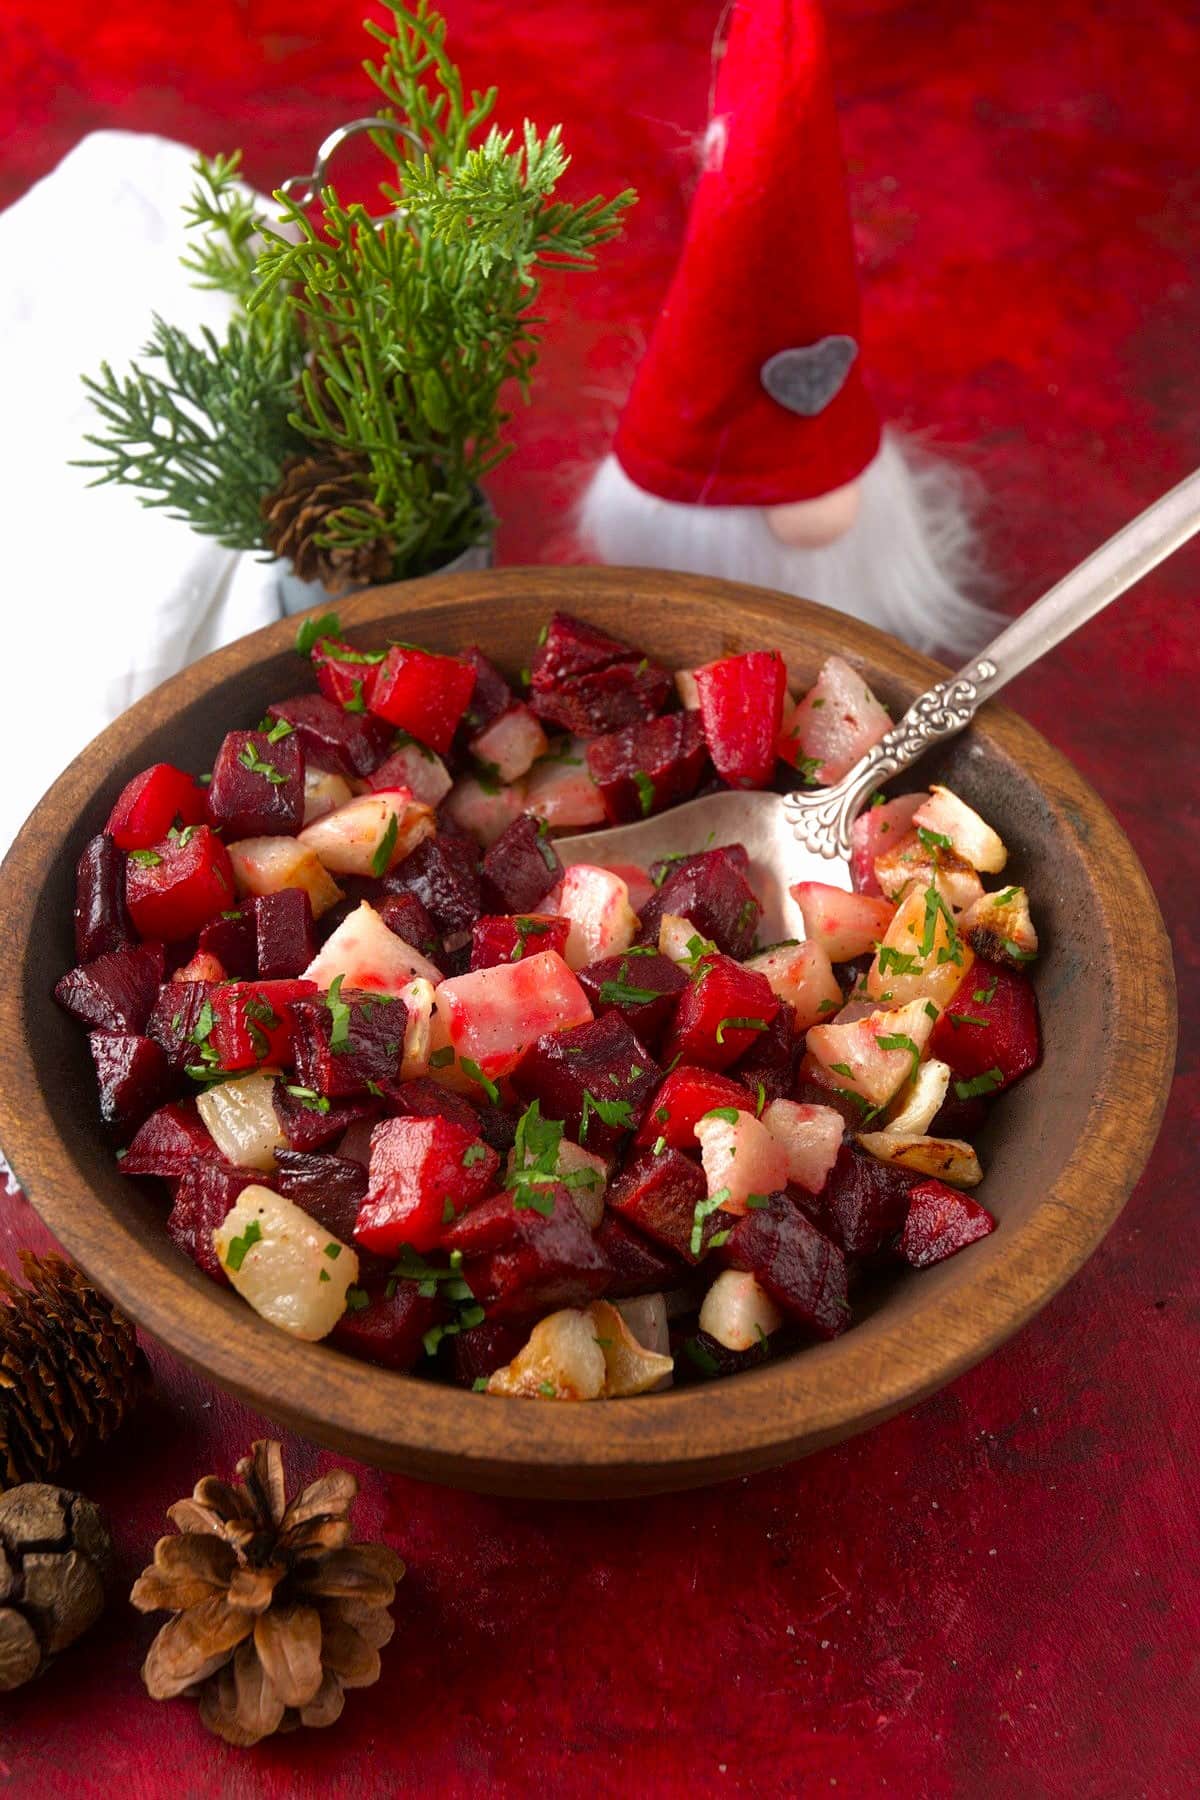 Roasted beets and turnips in wooden serving bowl with Christmas decorations.